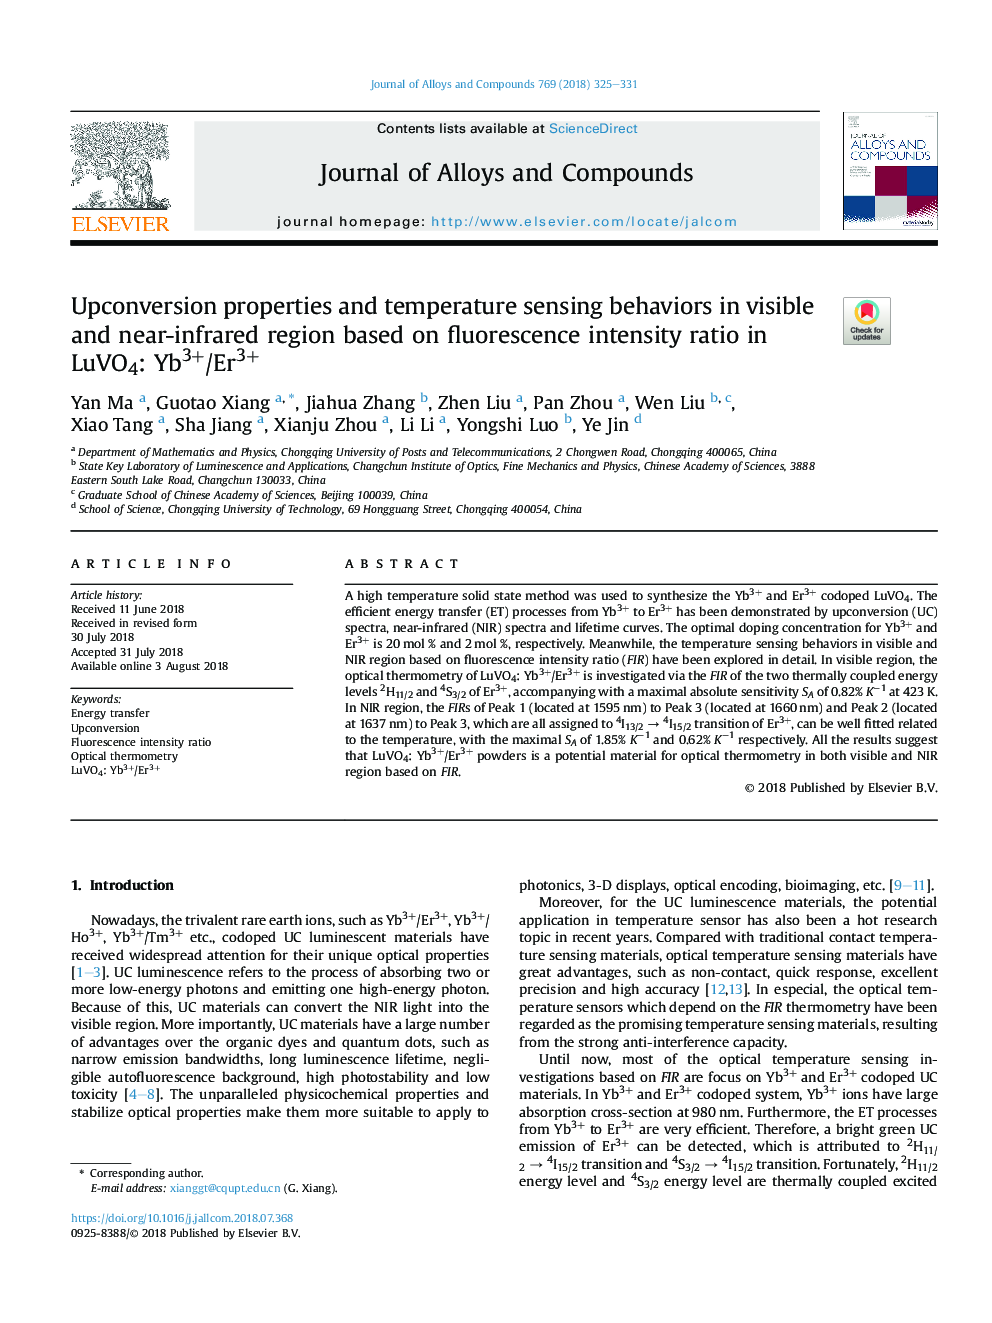 Upconversion properties and temperature sensing behaviors in visible and near-infrared region based on fluorescence intensity ratio in LuVO4: Yb3+/Er3+